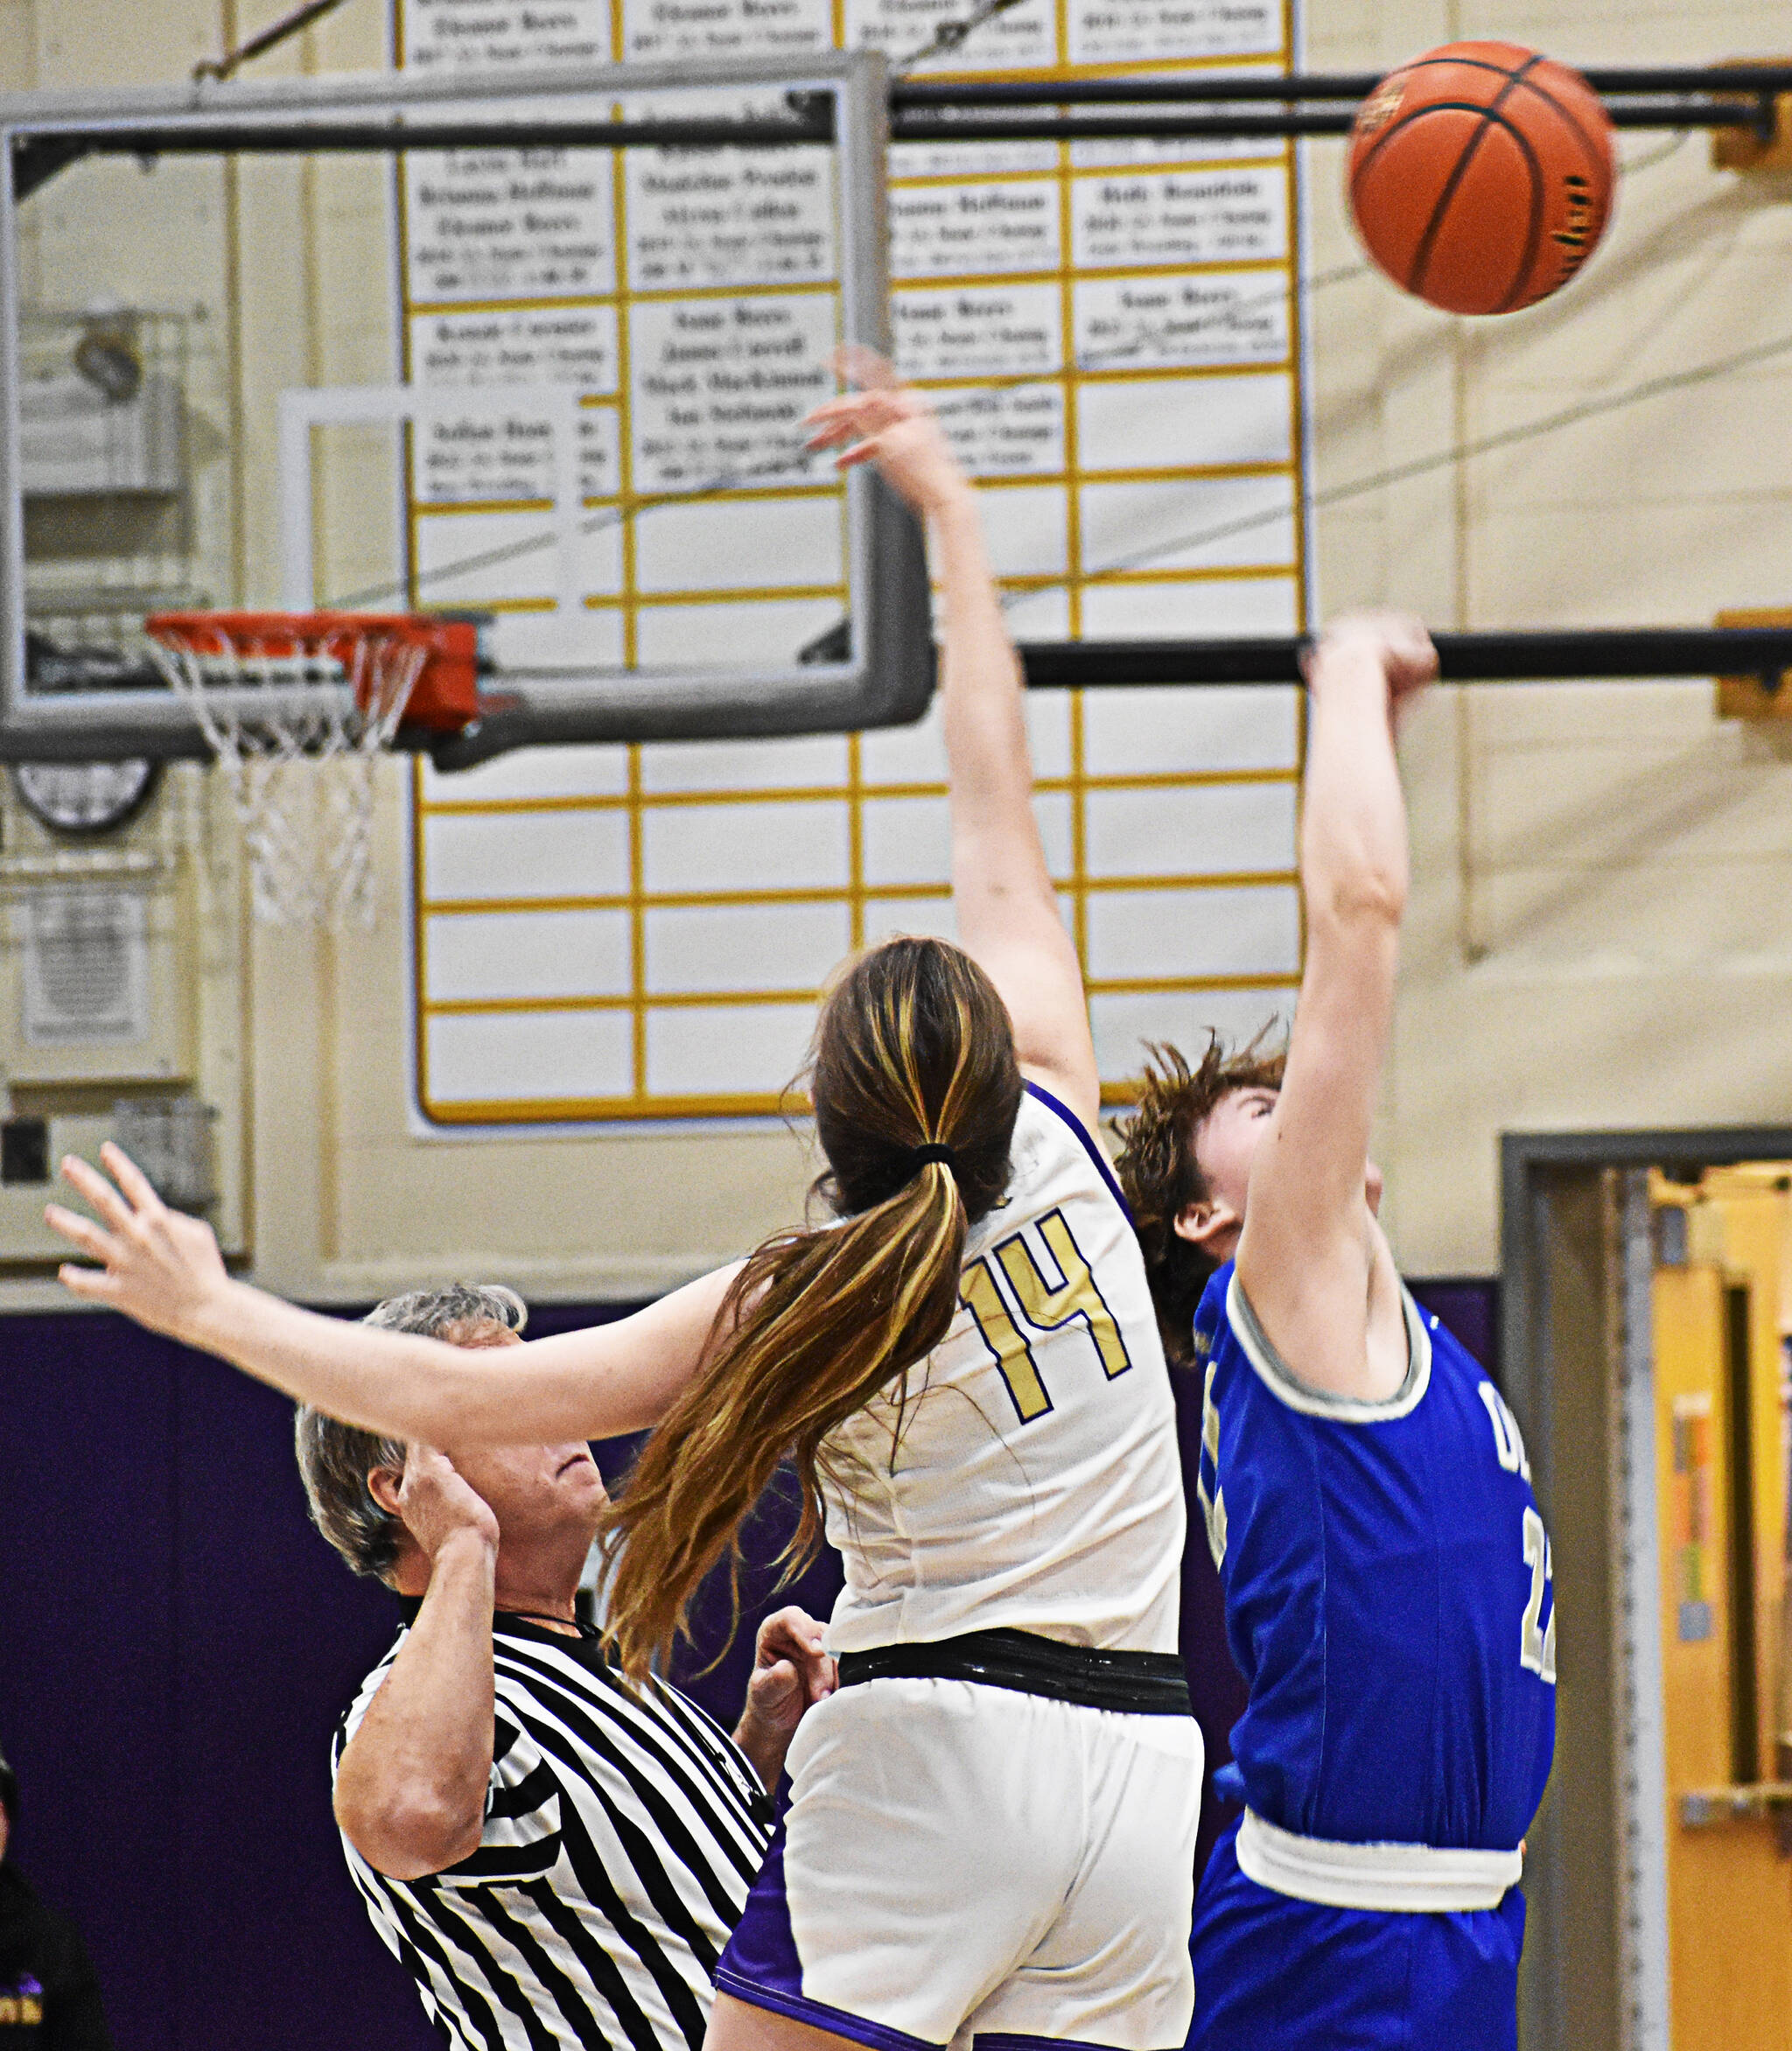 Gabriella Resser and Sophia Baugh jump for the opening tip-off.